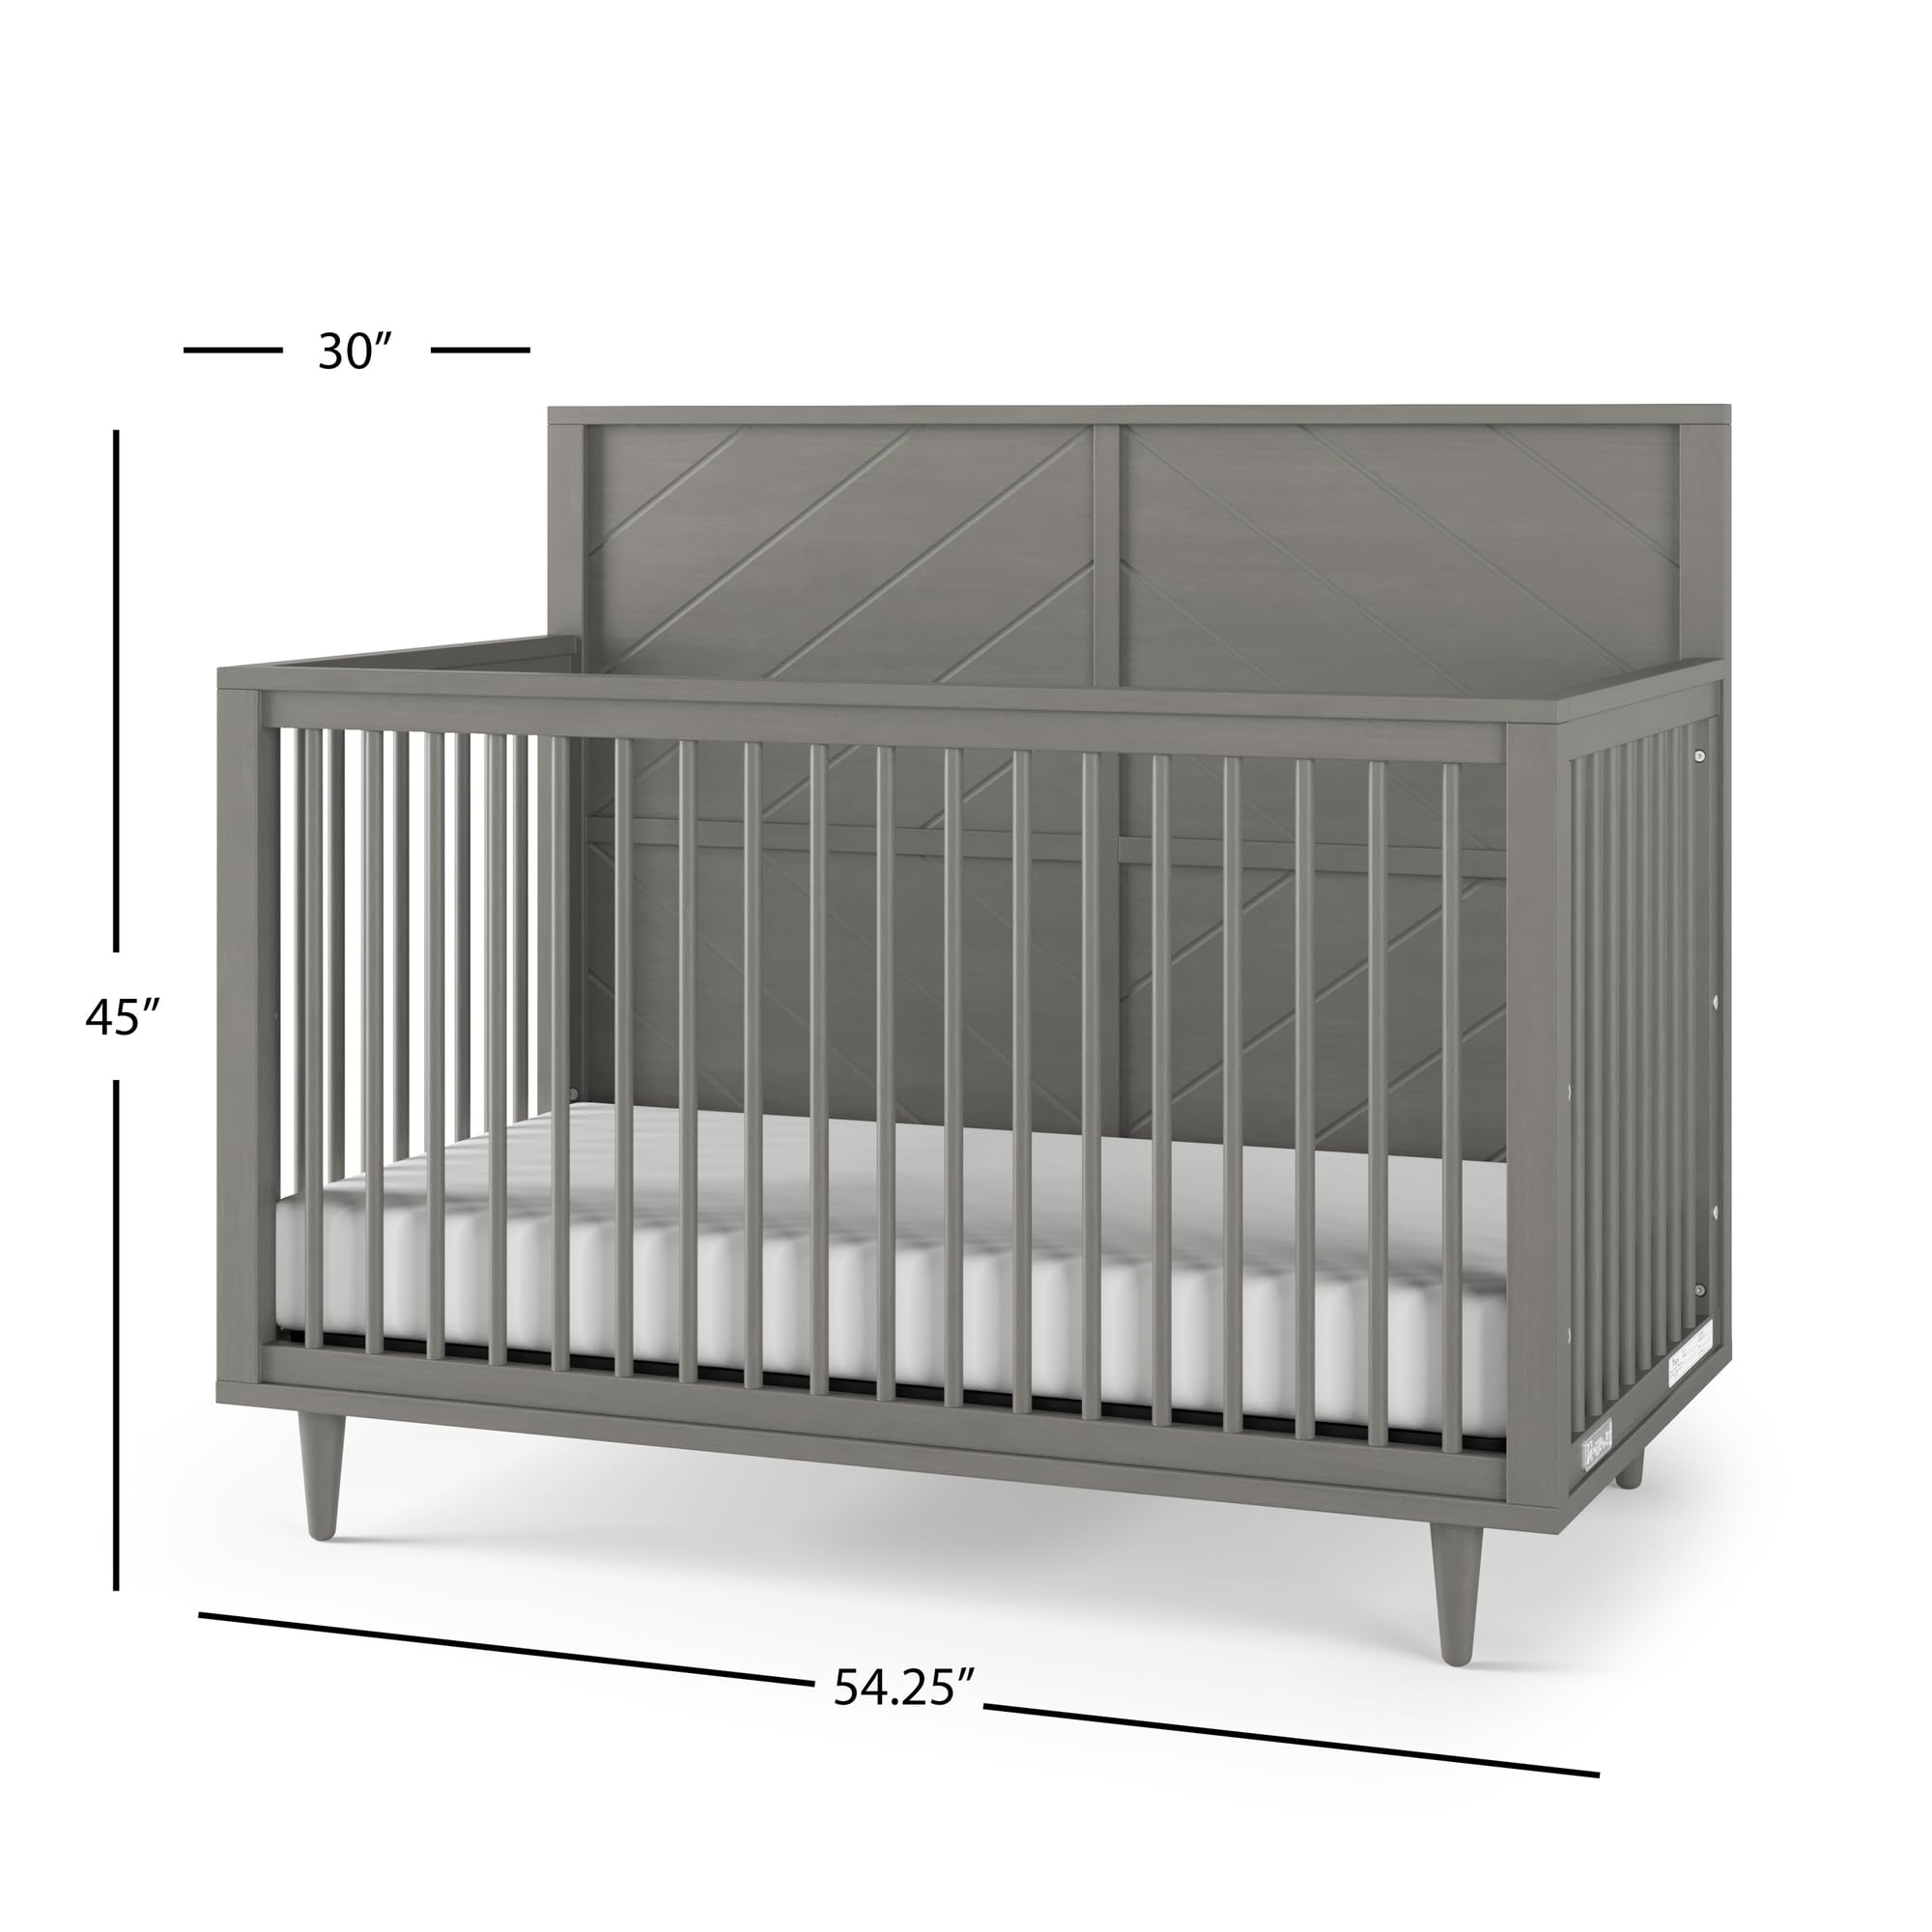 Child Craft Surrey Hill Crib and Dresser Nursery Set, 2-Piece, Includes 4-in-1 Convertible Crib and 3-Drawer Dresser, Grows with Your Baby (Lunar Gray)